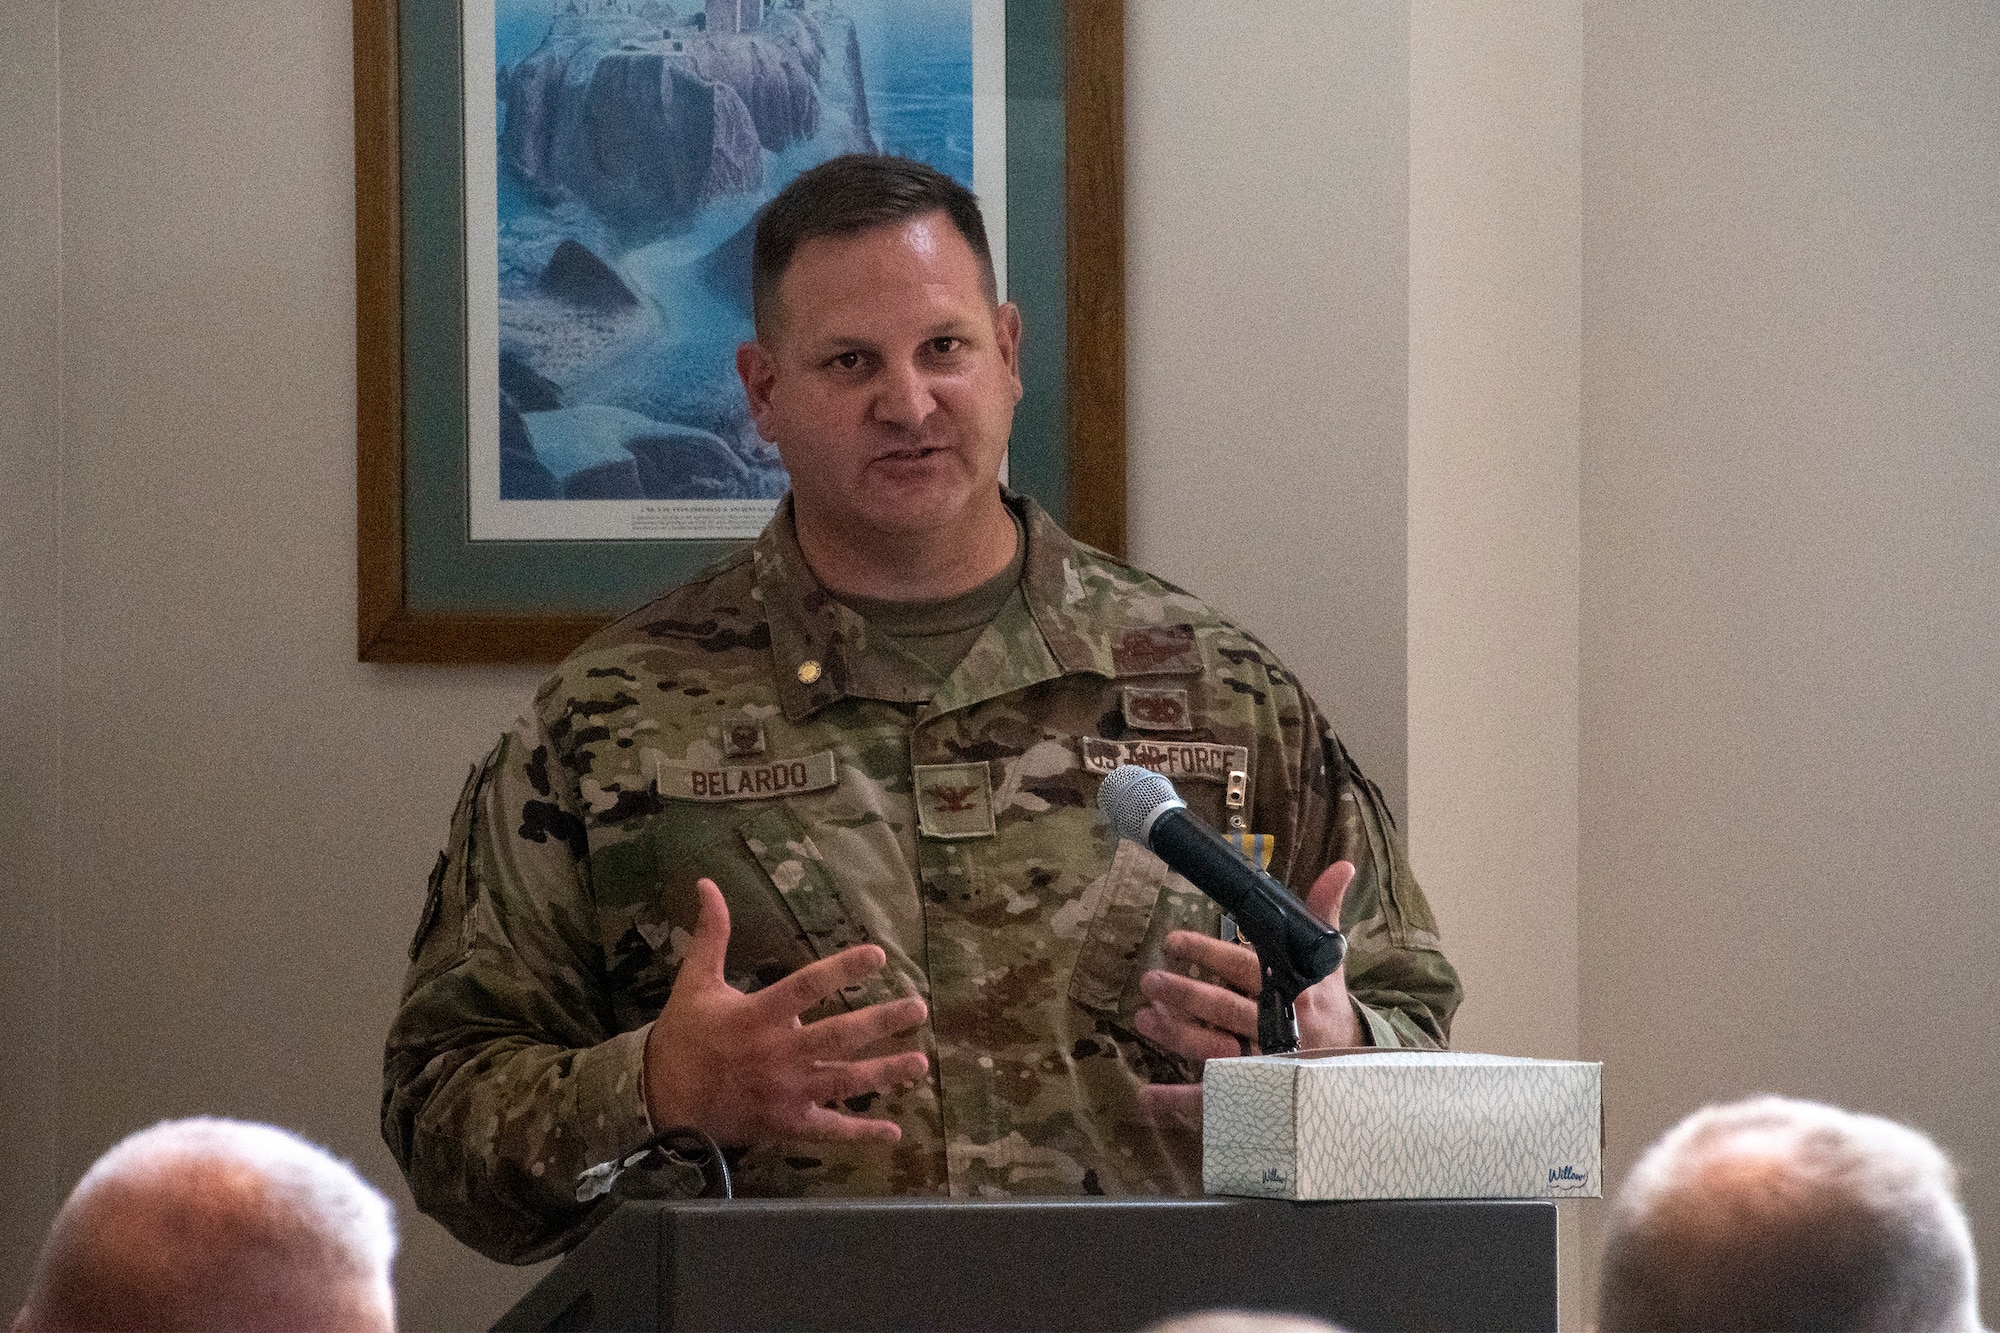 131st Maintenance Group Commander Col. Michael Belardo delivers remarks during his retirement ceremony Oct. 2, 2021, in Knob Noster, Missouri. Belardo retired from the Missouri Air National Guard after many years of service. (U.S. Air National Guard photo by Staff Sgt. Adrian Brakeley)